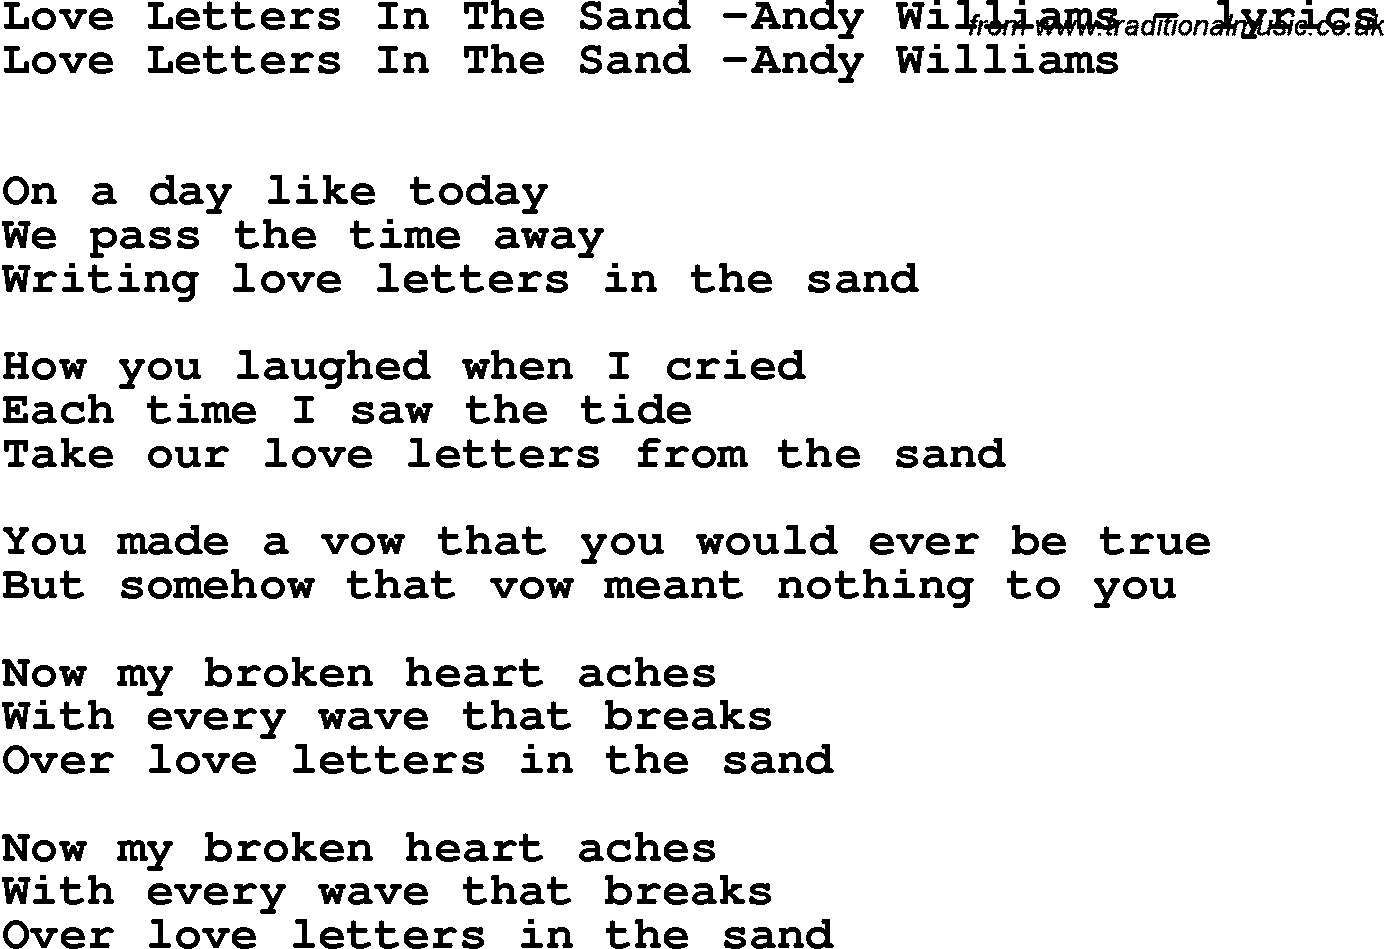 Love Song Lyrics for: Love Letters In The Sand -Andy Williams